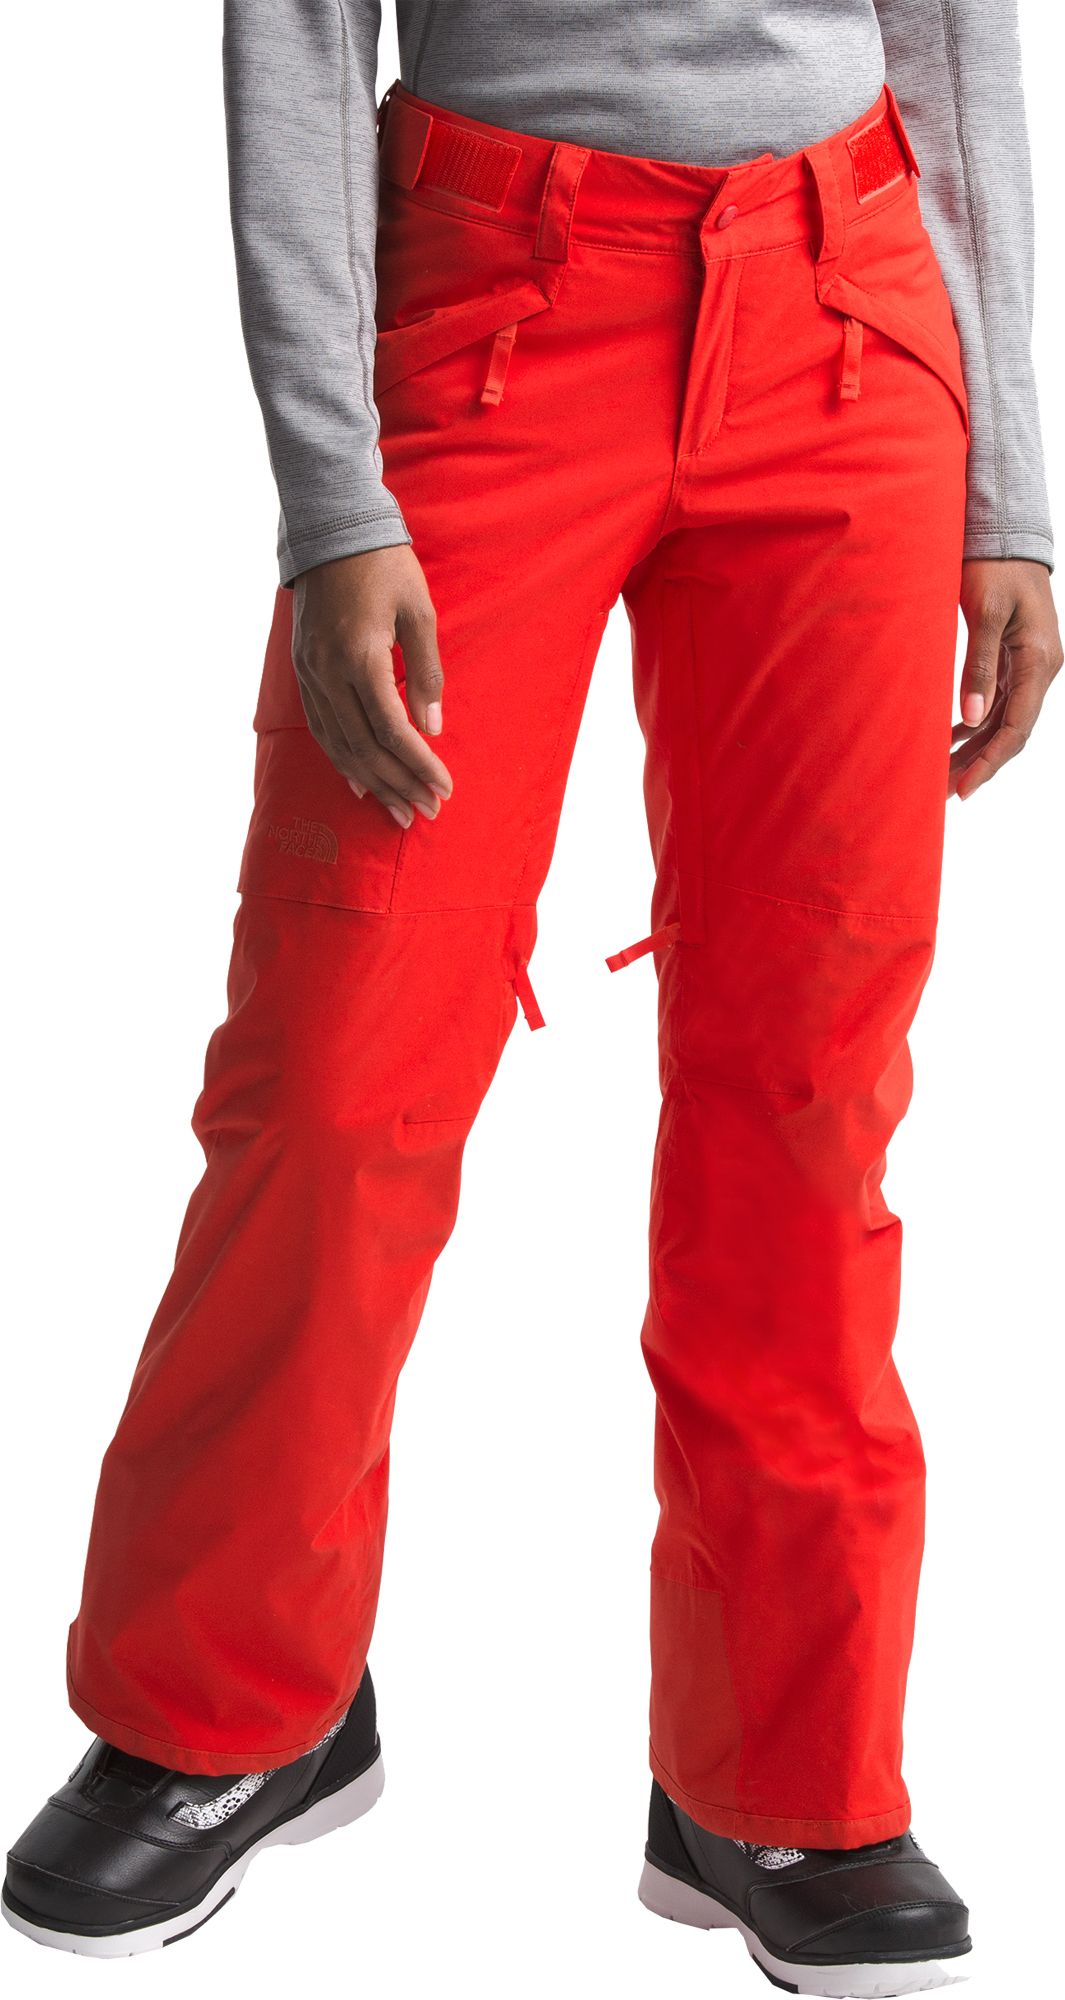 Freedom Insulated Snow Pants 